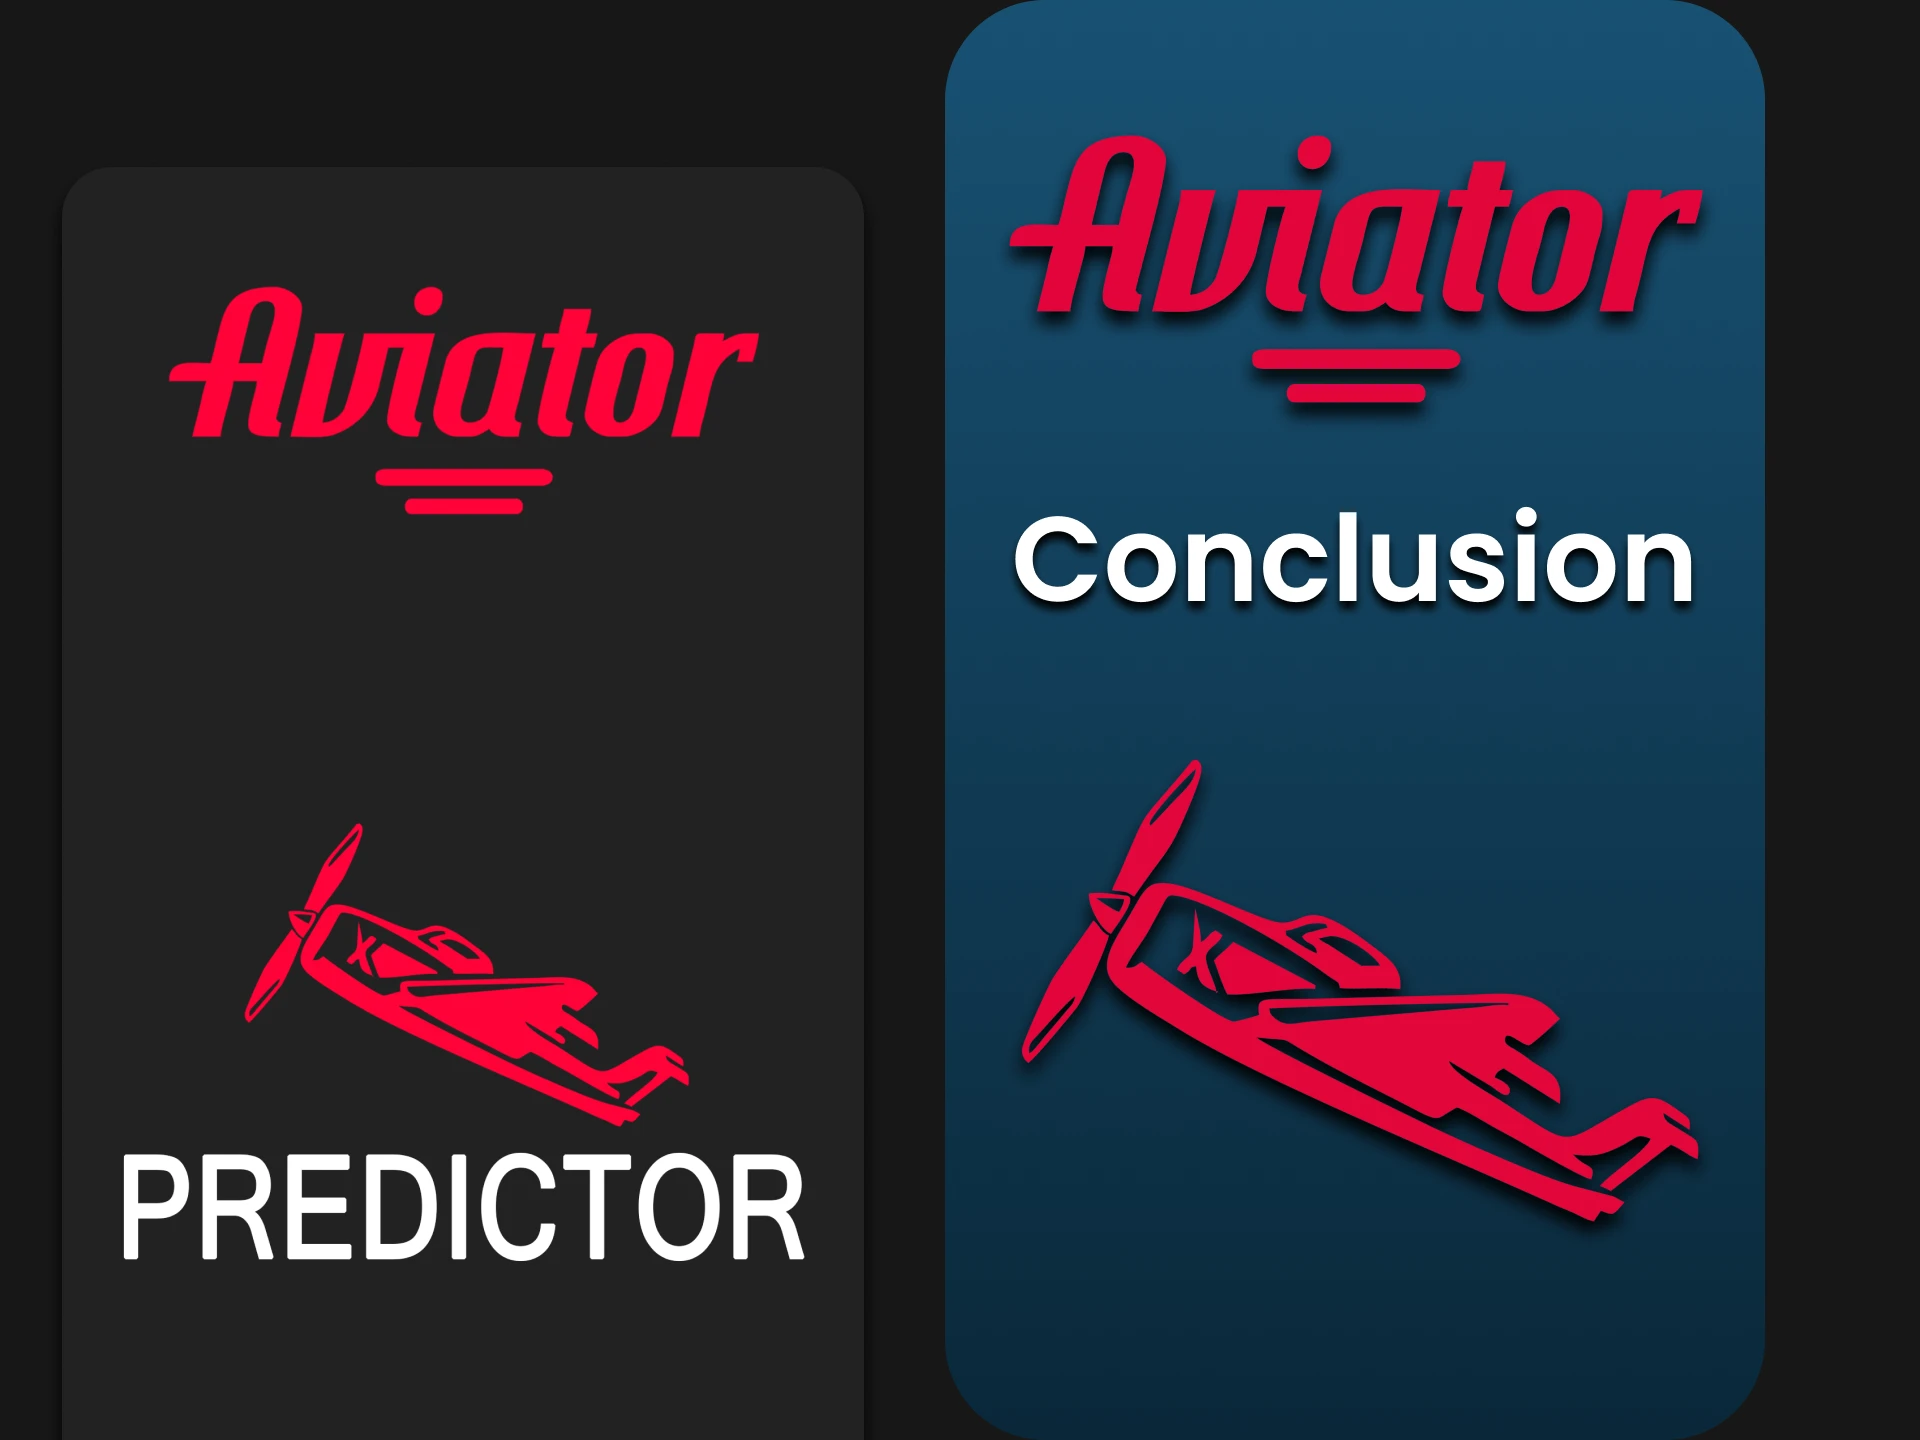 It is everyone's choice whether to use third-party software to play Aviator.